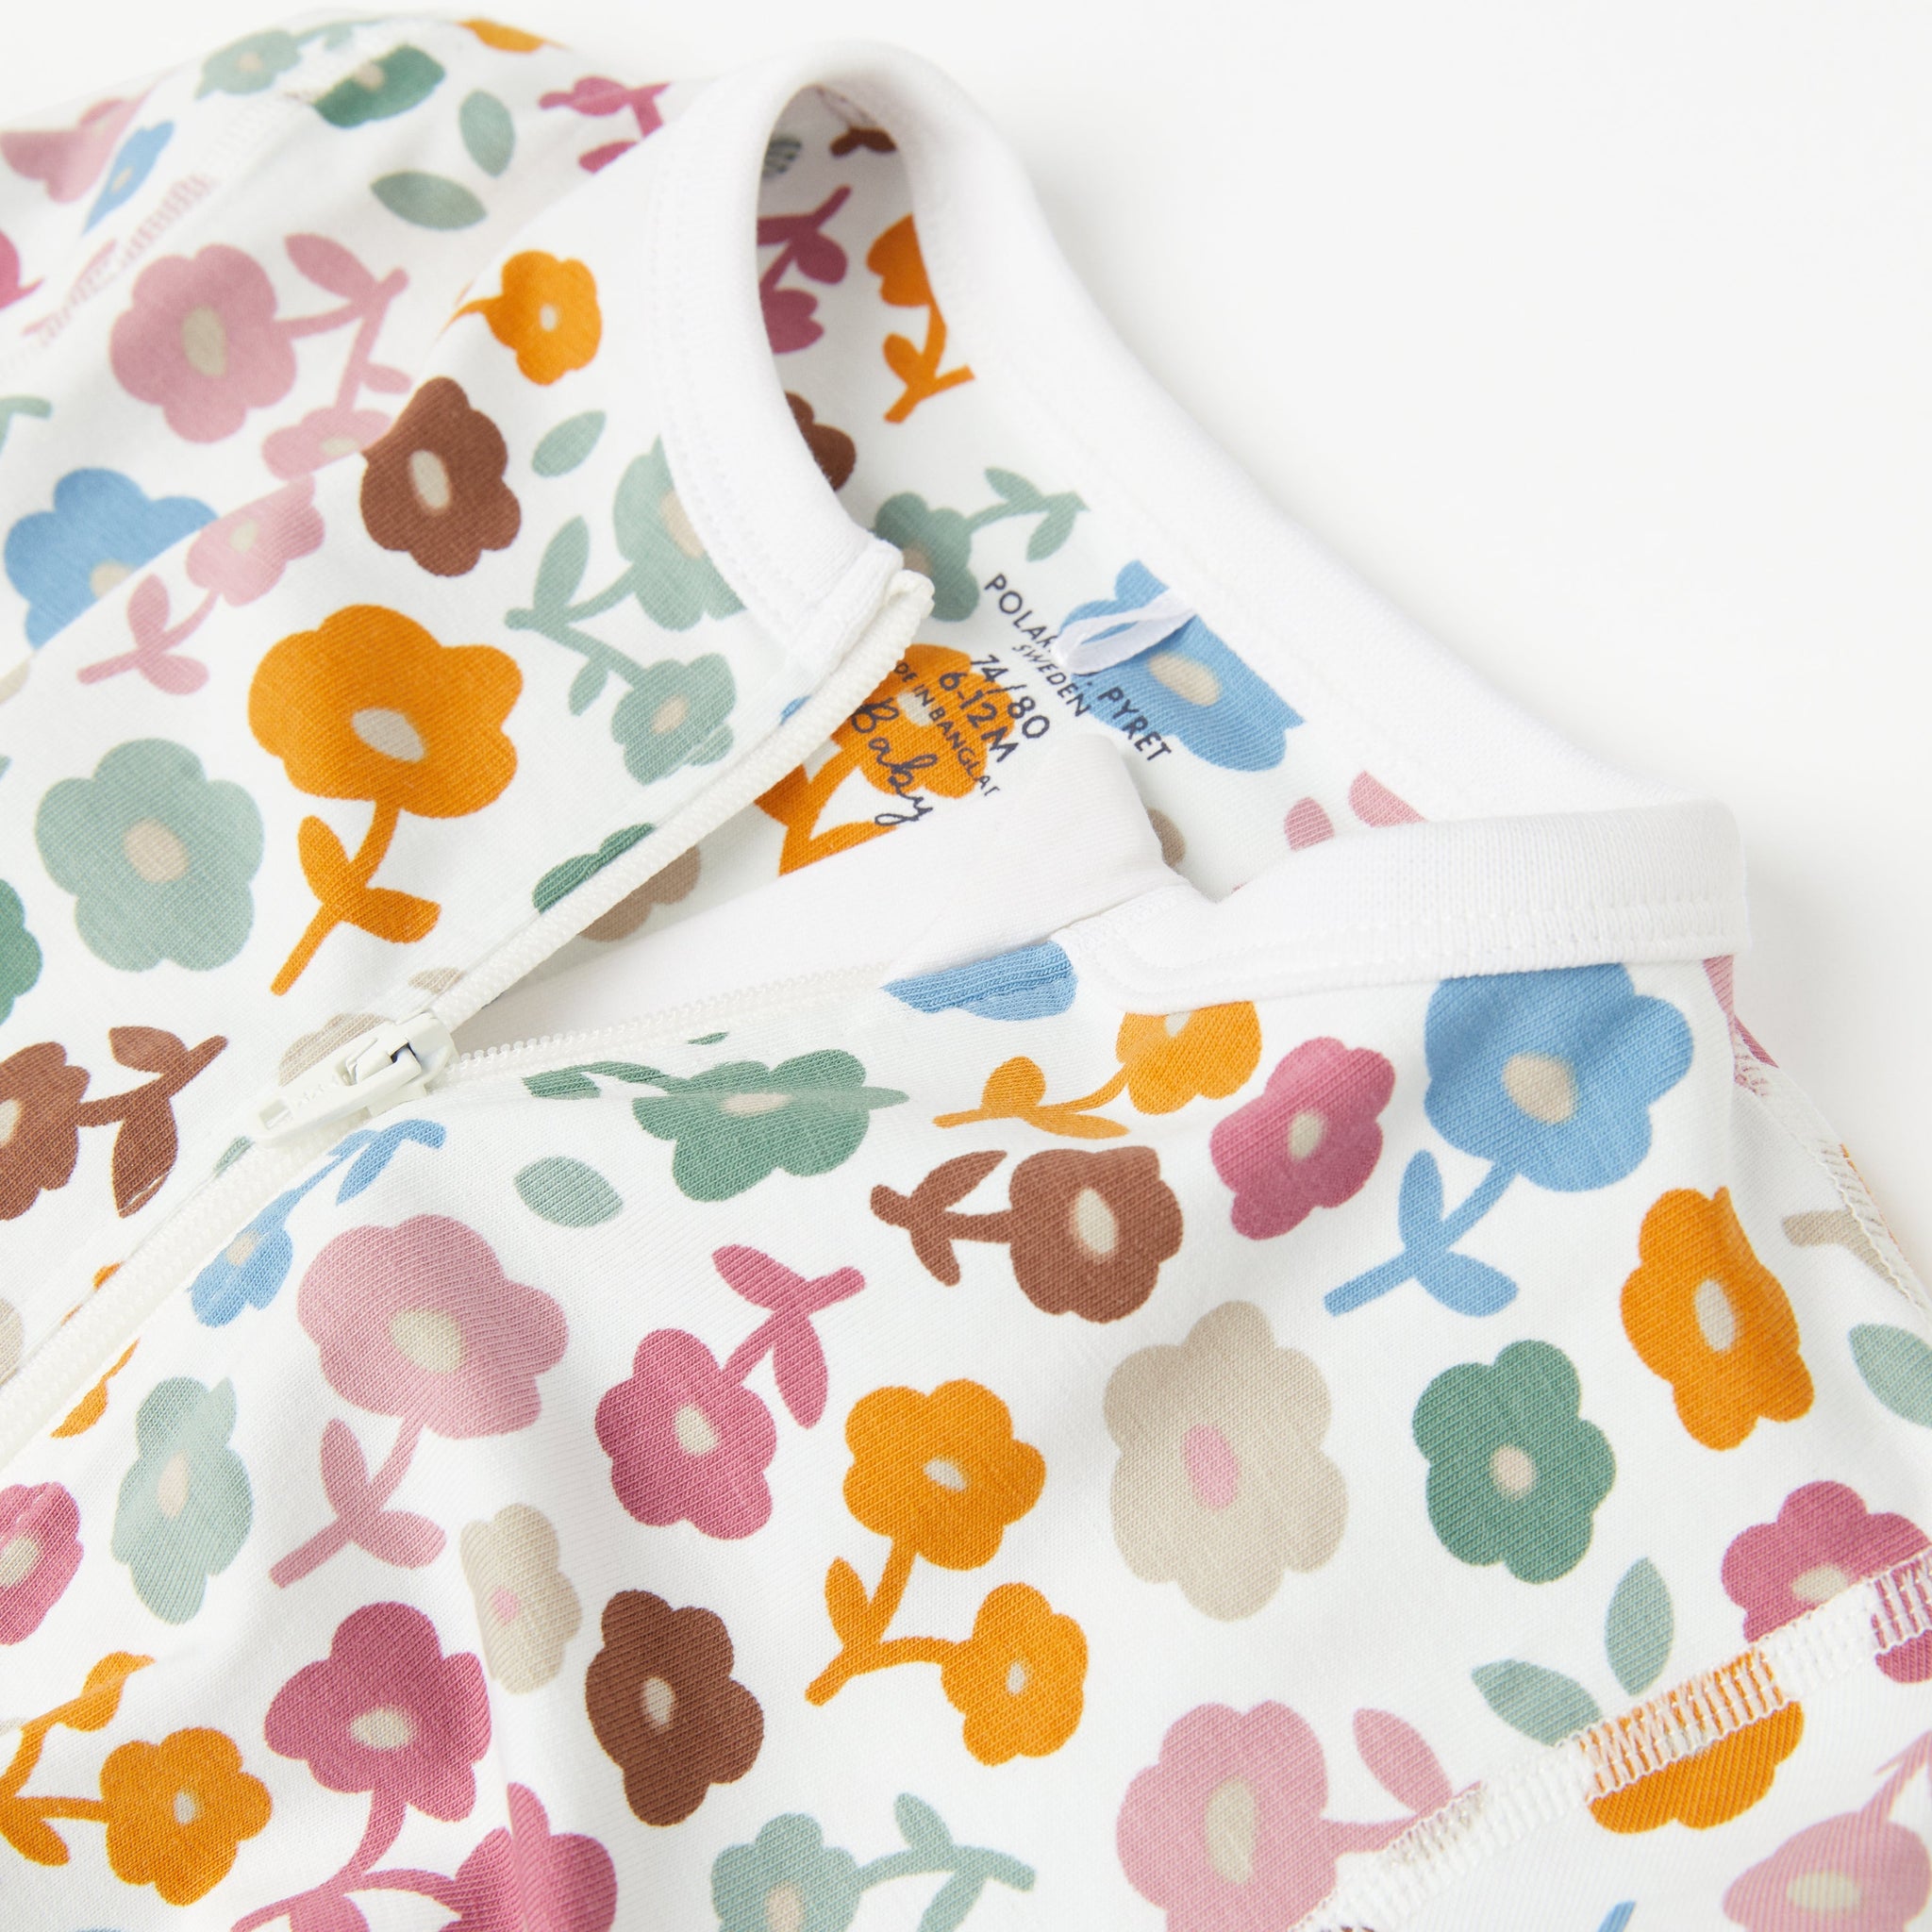 Floral Print White Baby Sleepsuit from the Polarn O. Pyret Kidswear collection. Clothes made using sustainably sourced materials.